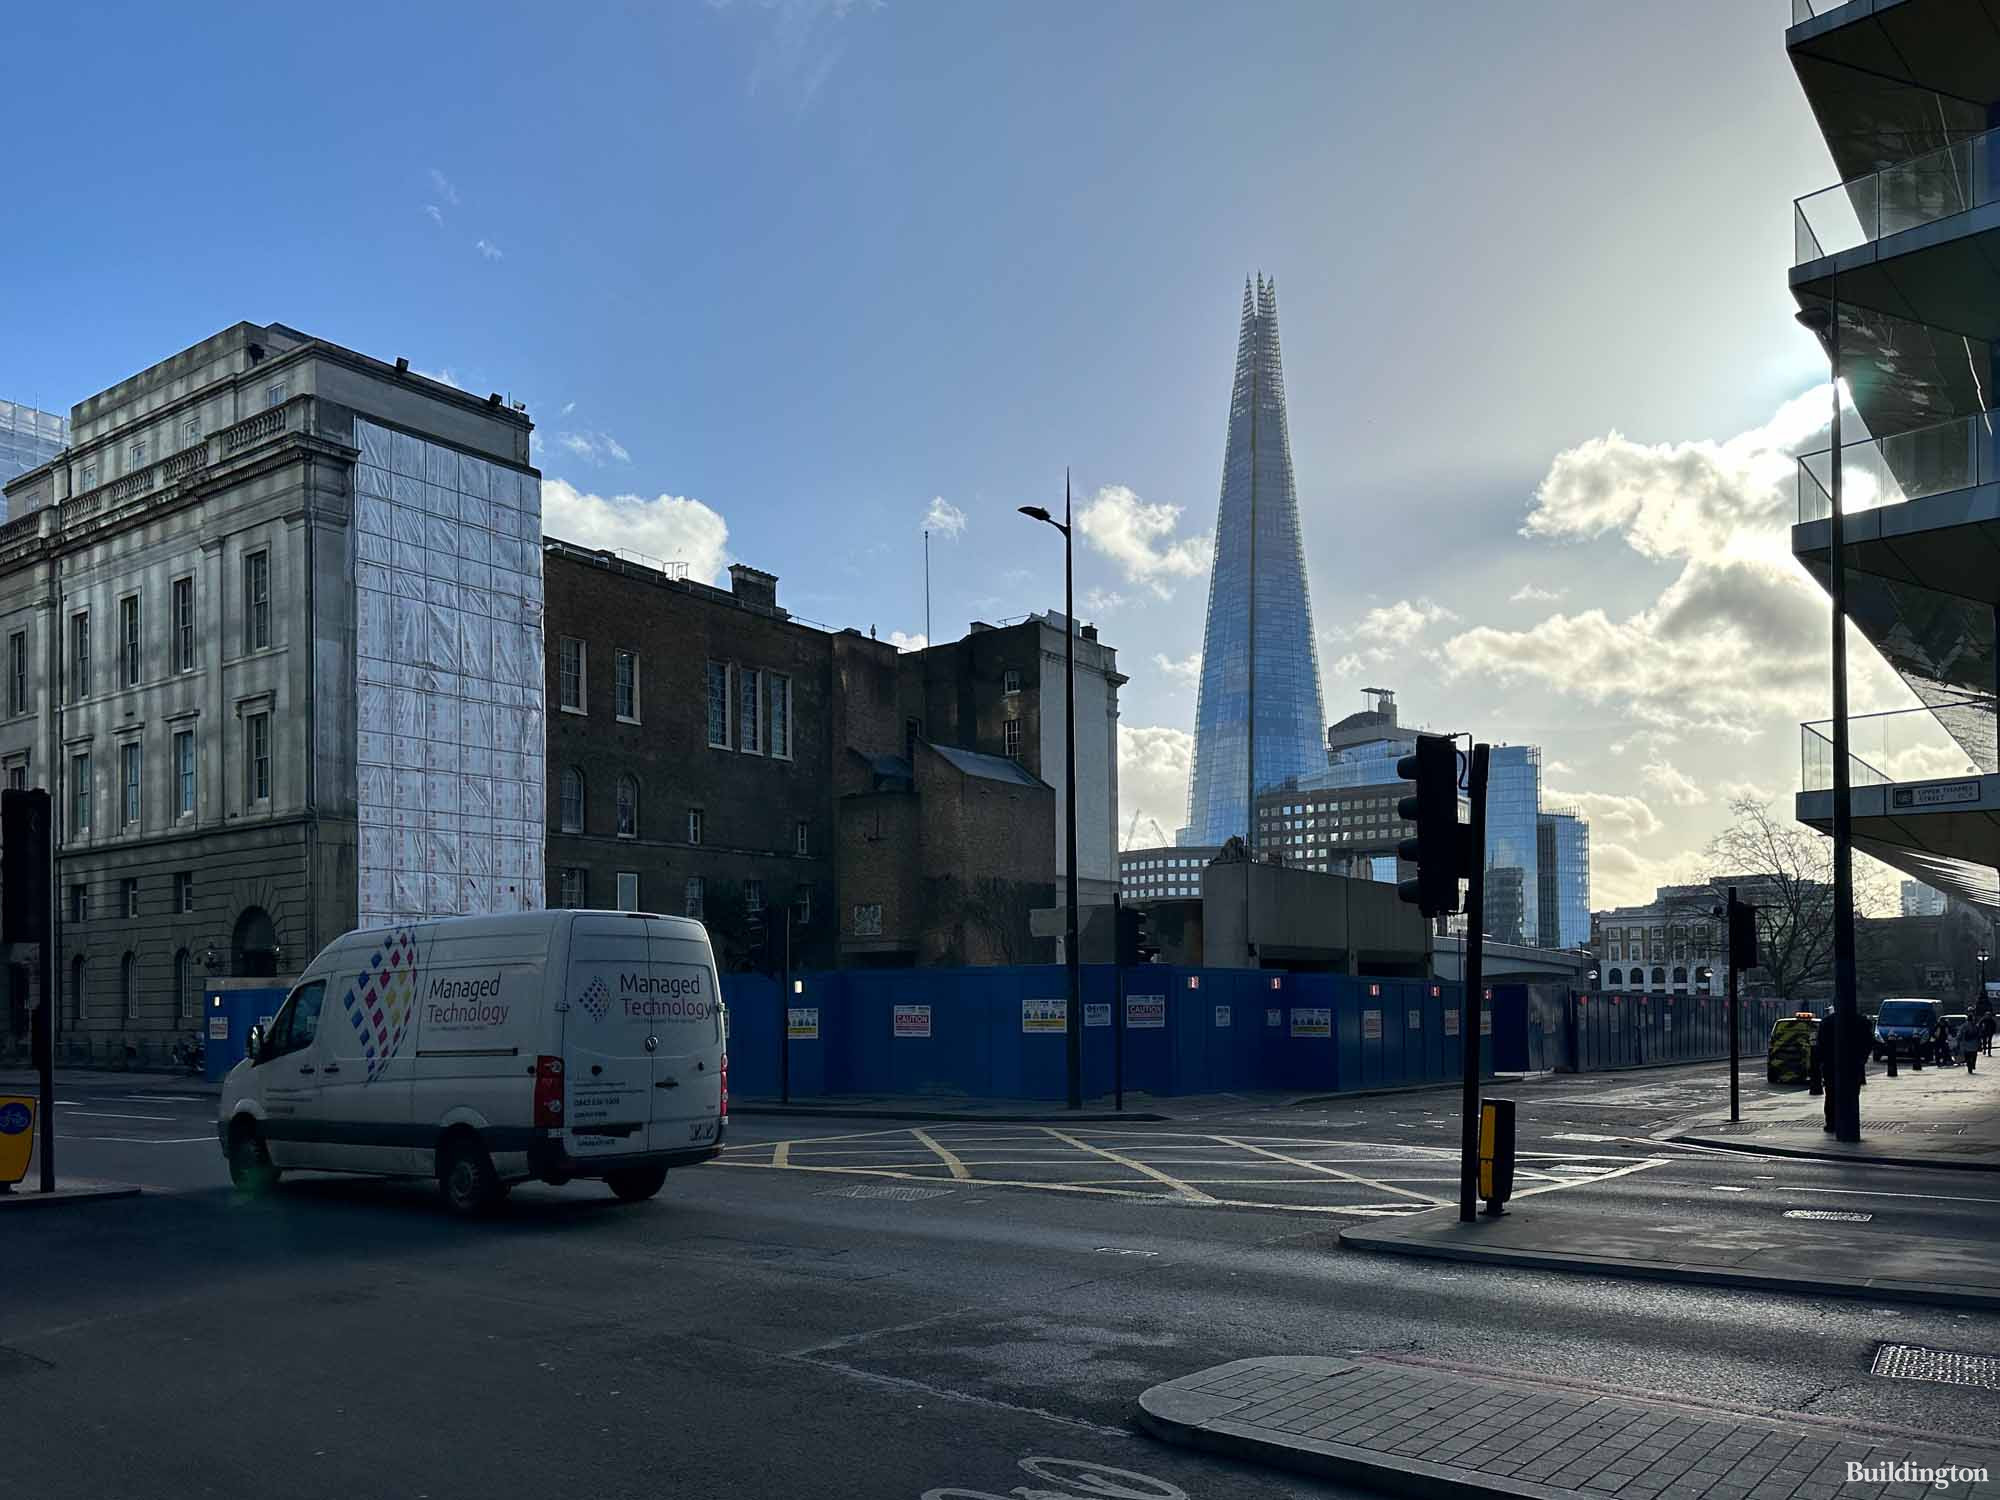 Seal House development site from Upper Thames Street in the City of London EC4. Fishmongers' Hall to the left and The Shard in the background.